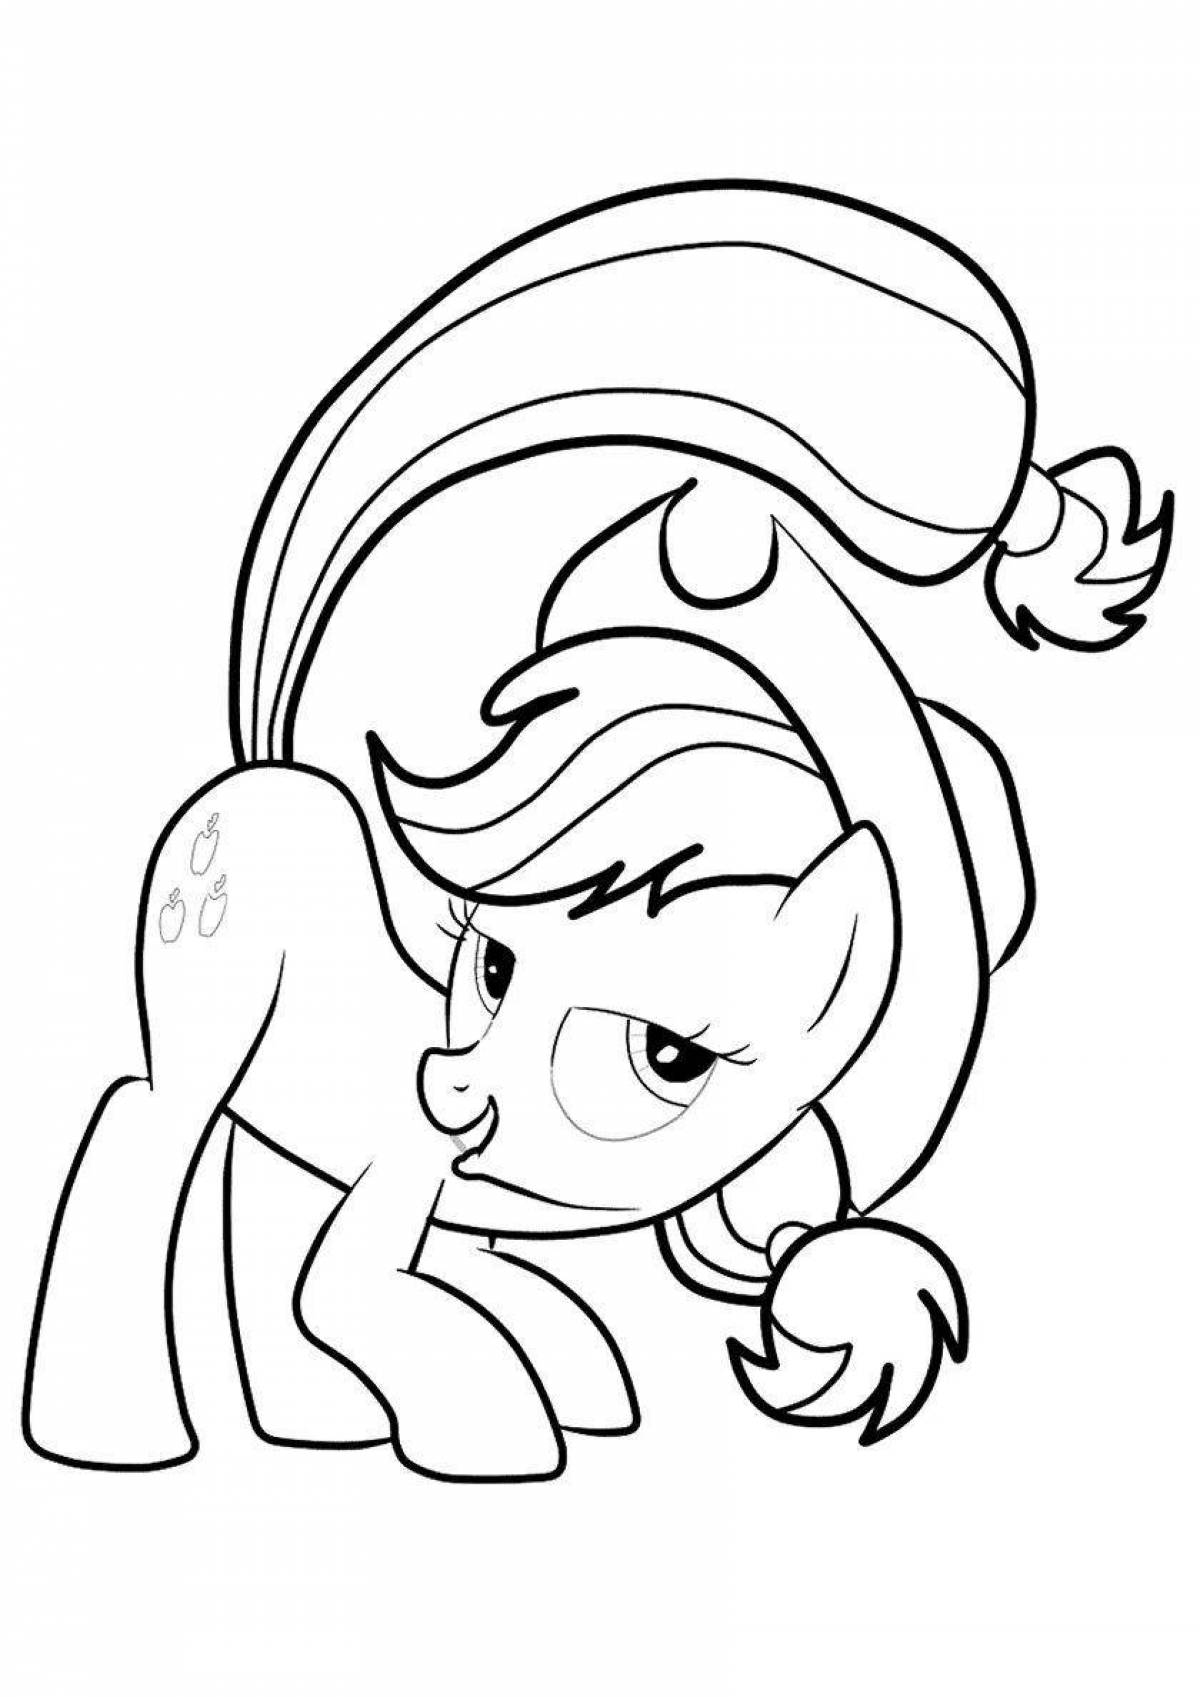 Apple jack animated coloring book